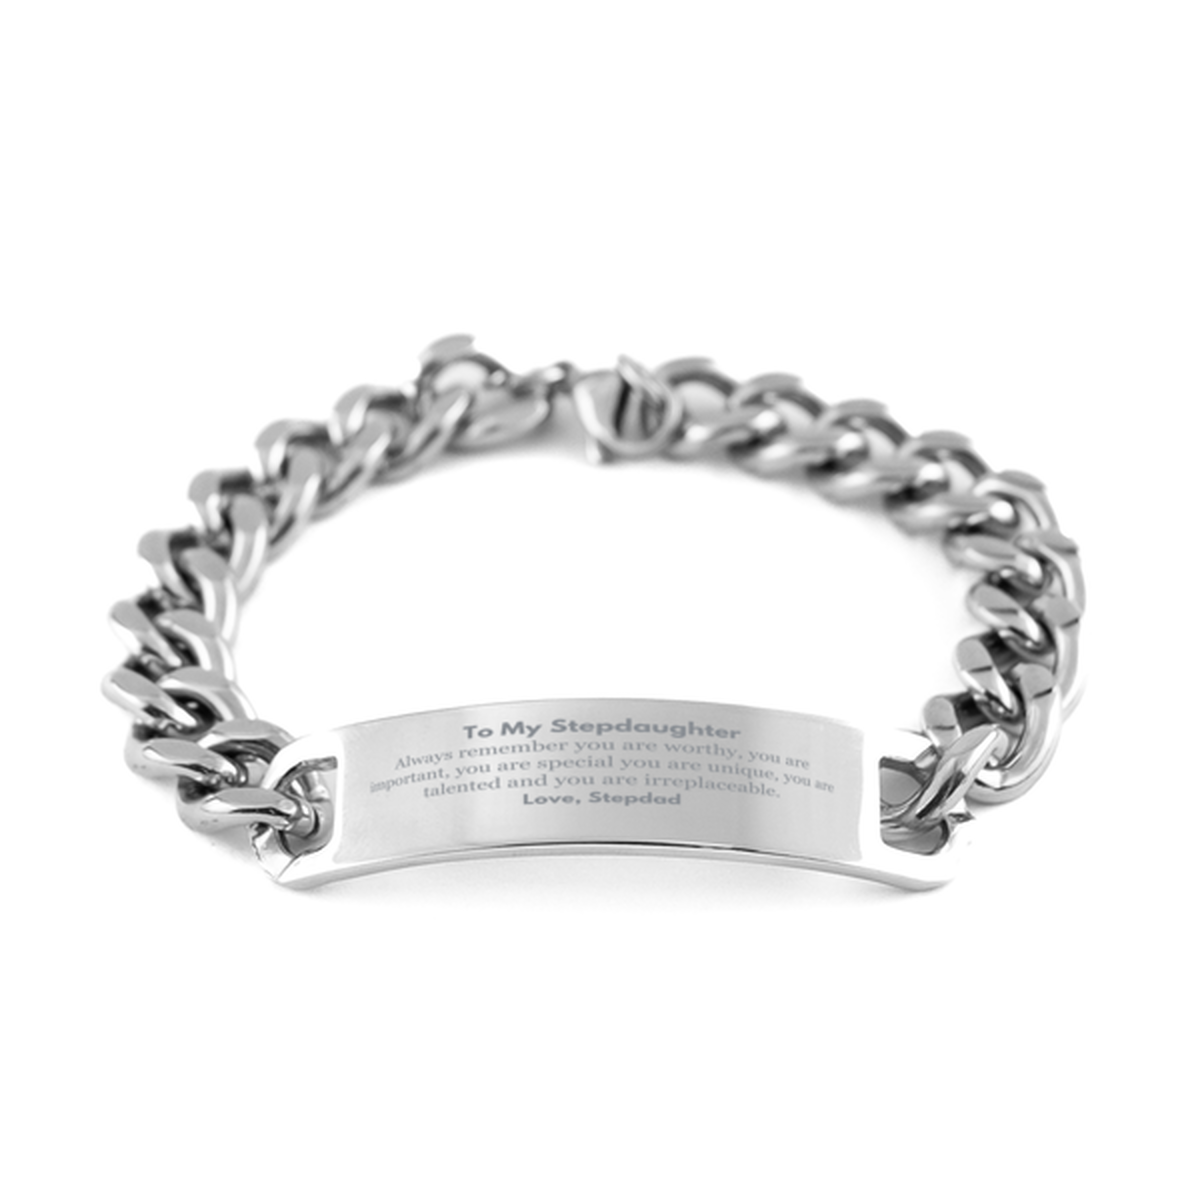 Stepdaughter Birthday Gifts from Stepdad, Inspirational Cuban Chain Stainless Steel Bracelet for Stepdaughter Christmas Graduation Gifts for Stepdaughter Always remember you are worthy, you are important. Love, Stepdad